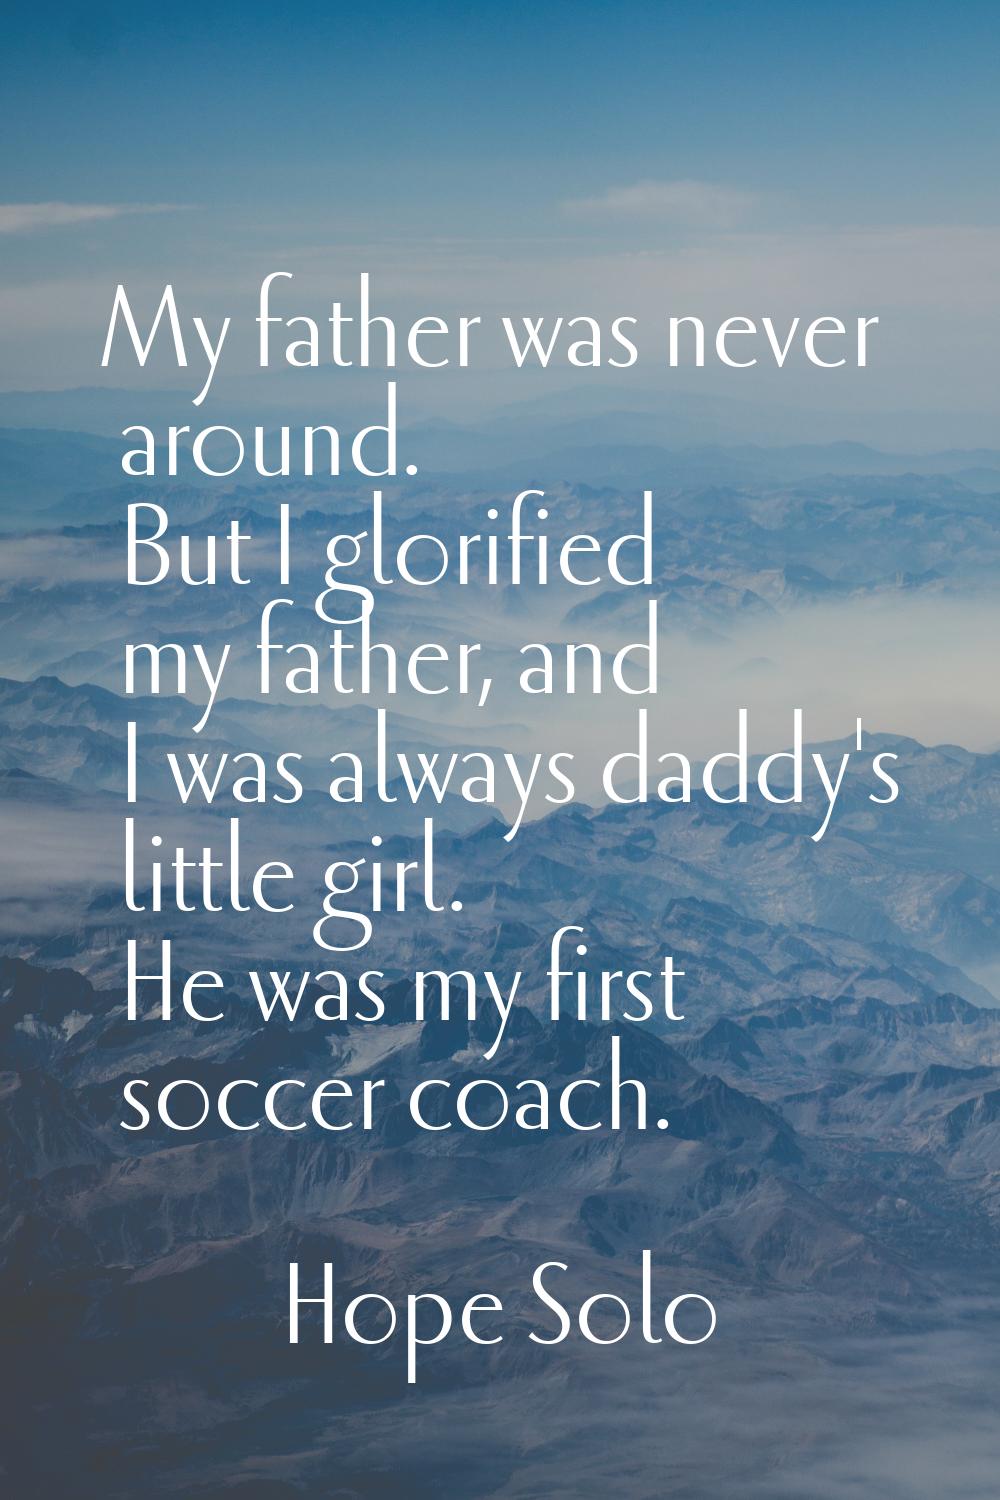 My father was never around. But I glorified my father, and I was always daddy's little girl. He was